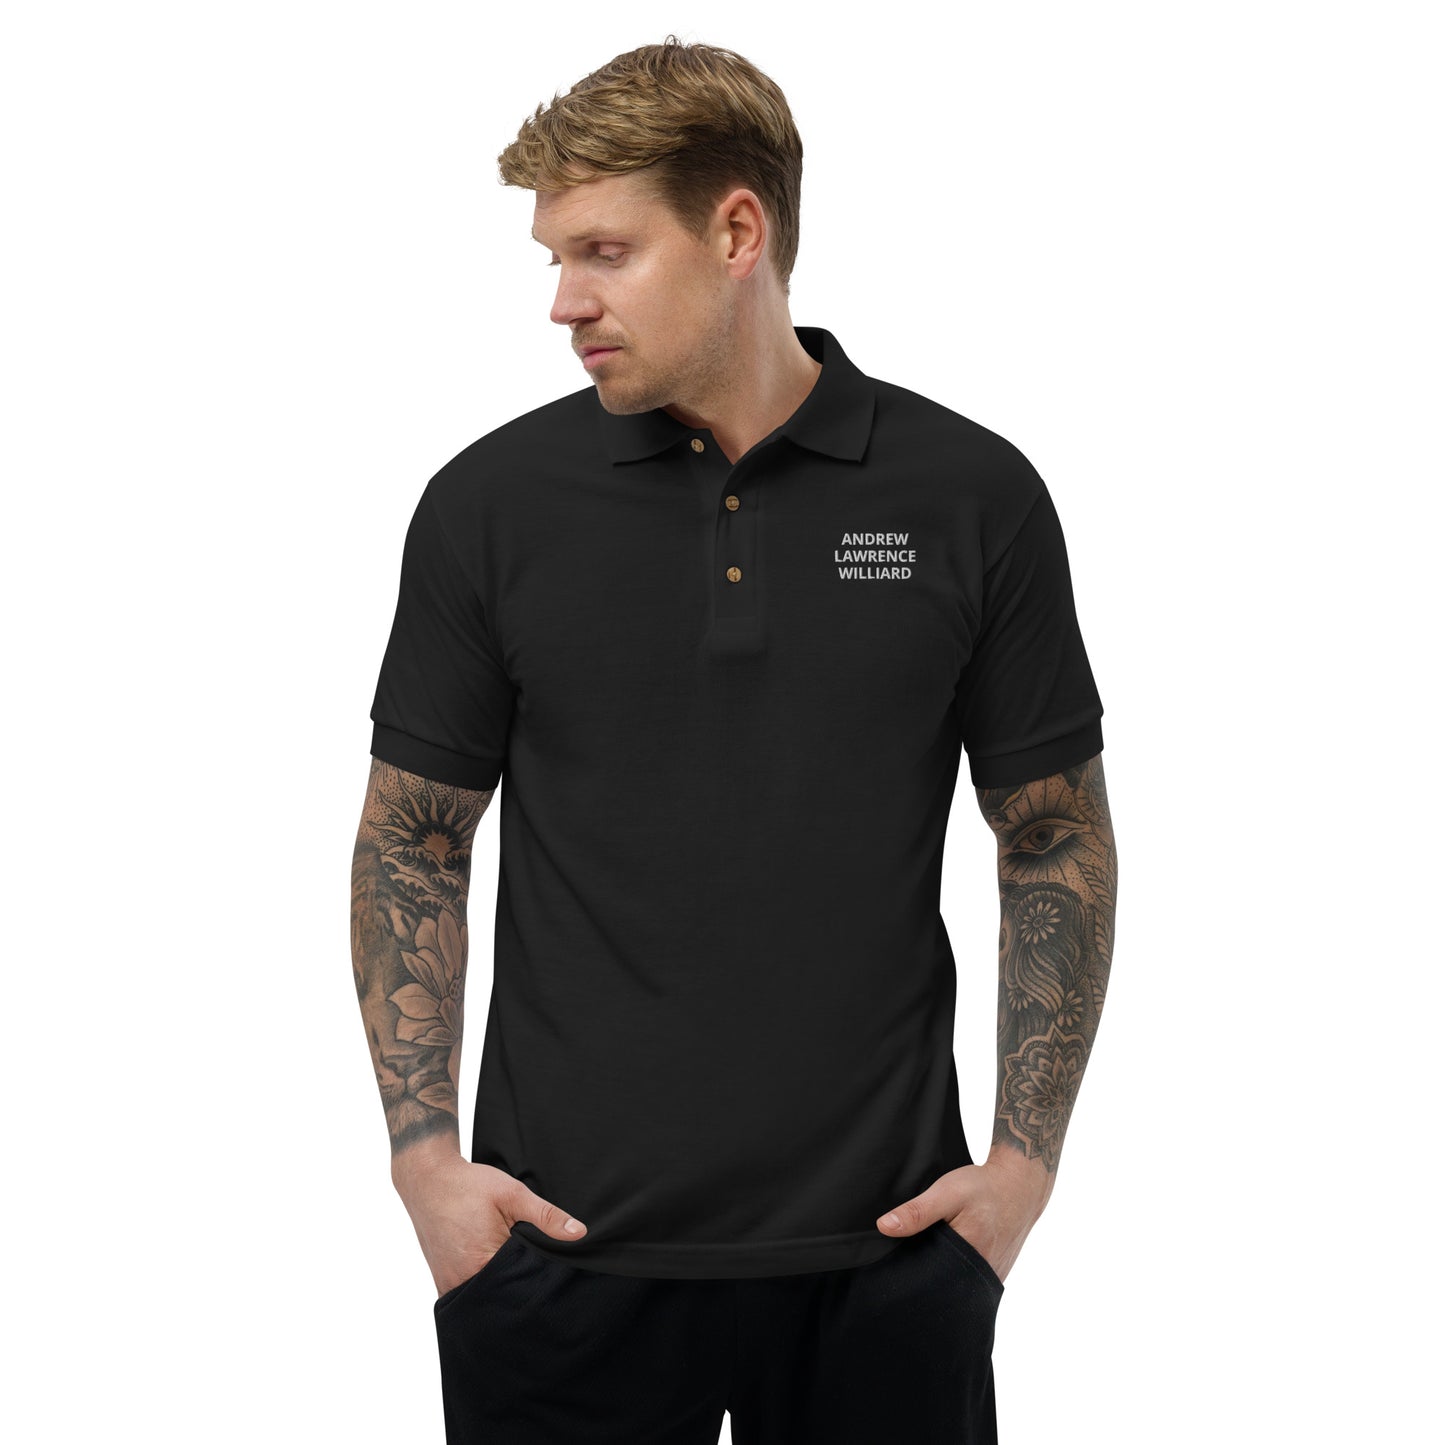 ALW Embroidered Polo Shirt